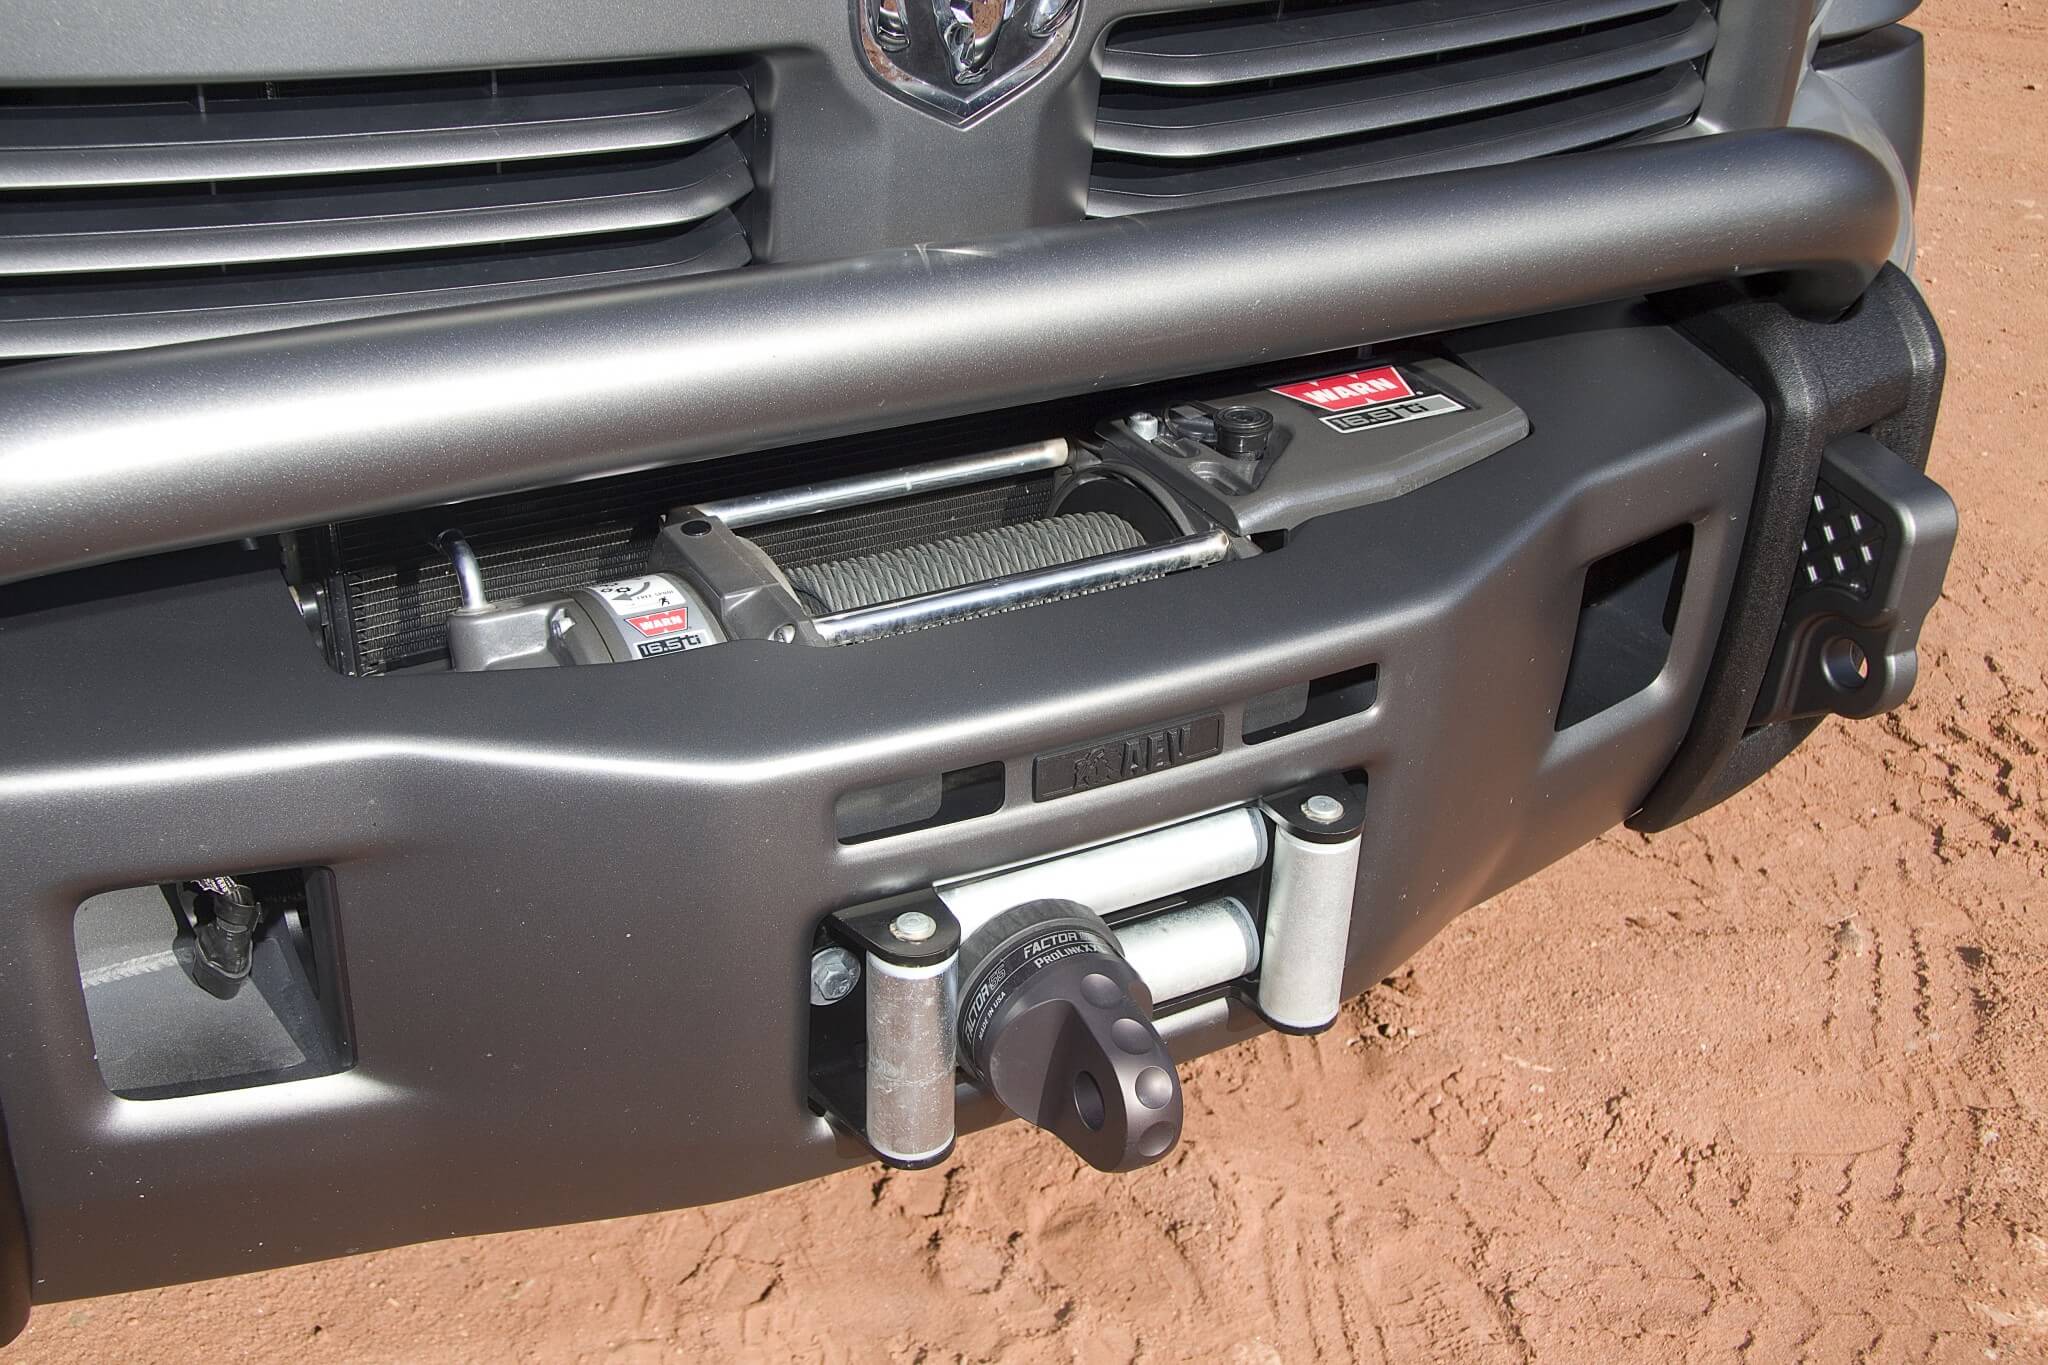 The AEV Ram bumper is capable of fitting a Warn Industries 16.5 Ti winch. This unit has a maximum pull rating of 16,500 lbs., more than enough for this Diesel Ram truck to assist others on the trail. 